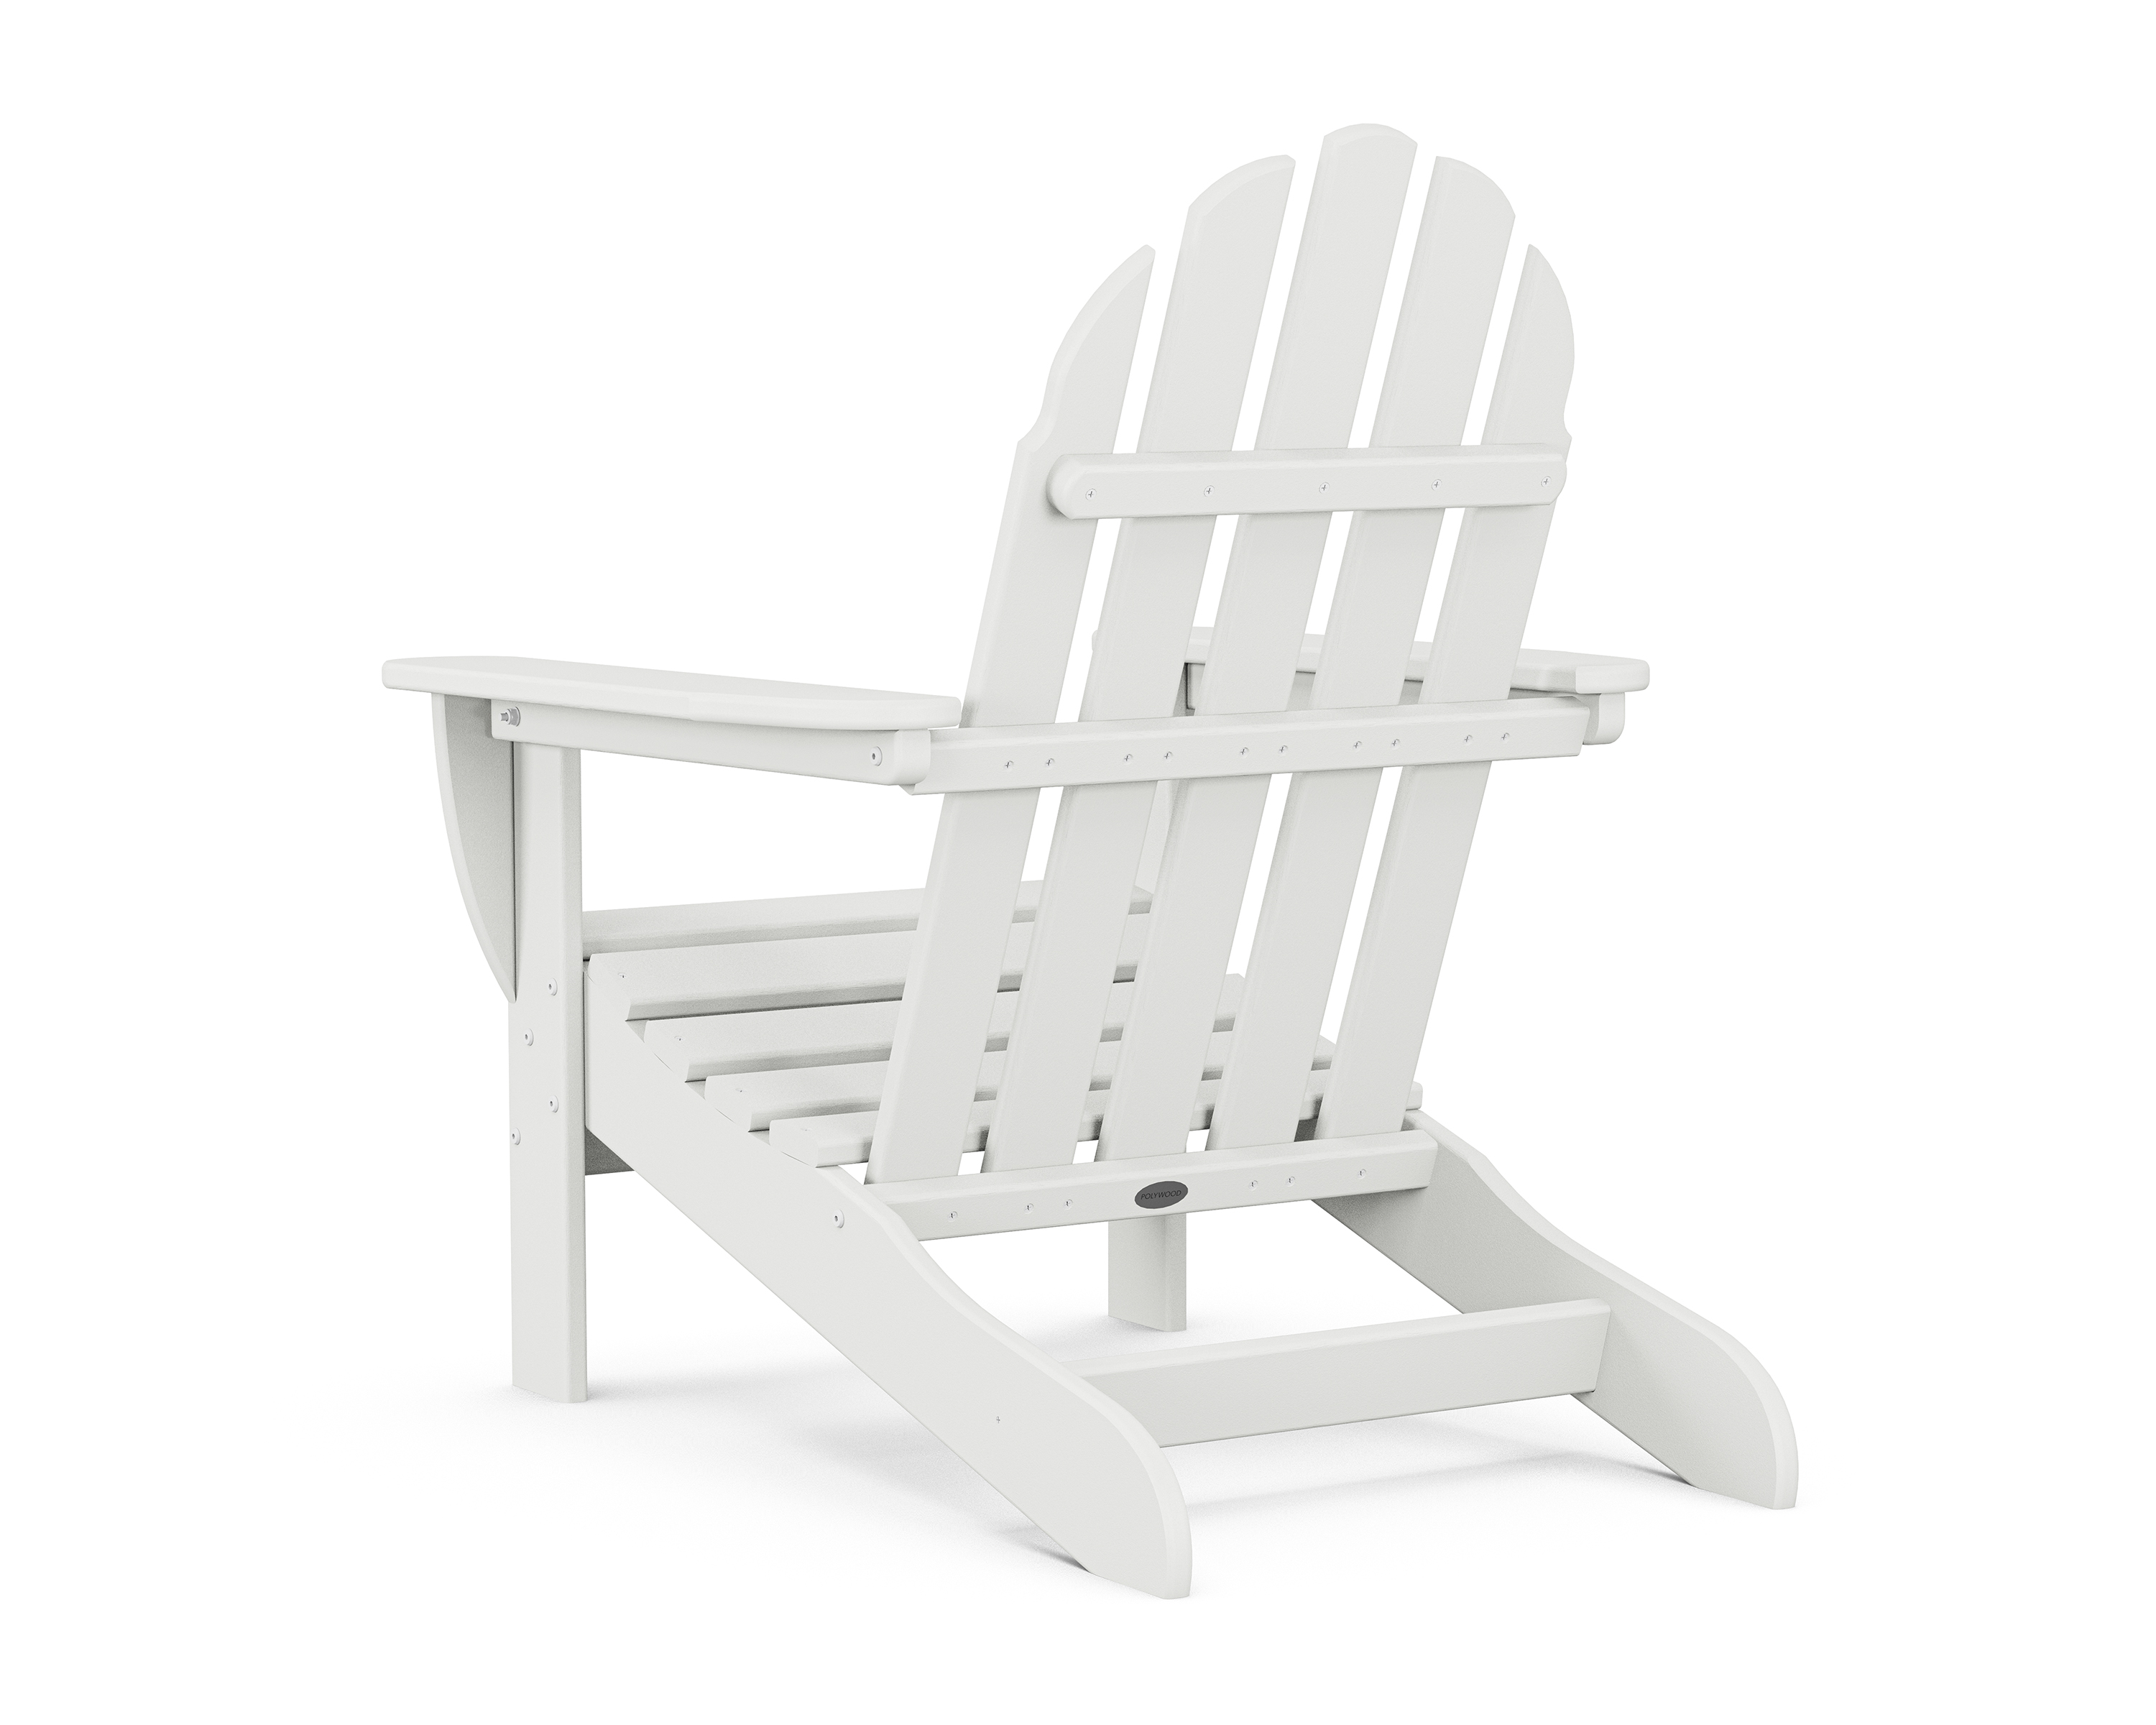 POLYWOOD Classic Adirondack 3-Piece Set with South Beach 18" Side Table in White - image 5 of 5